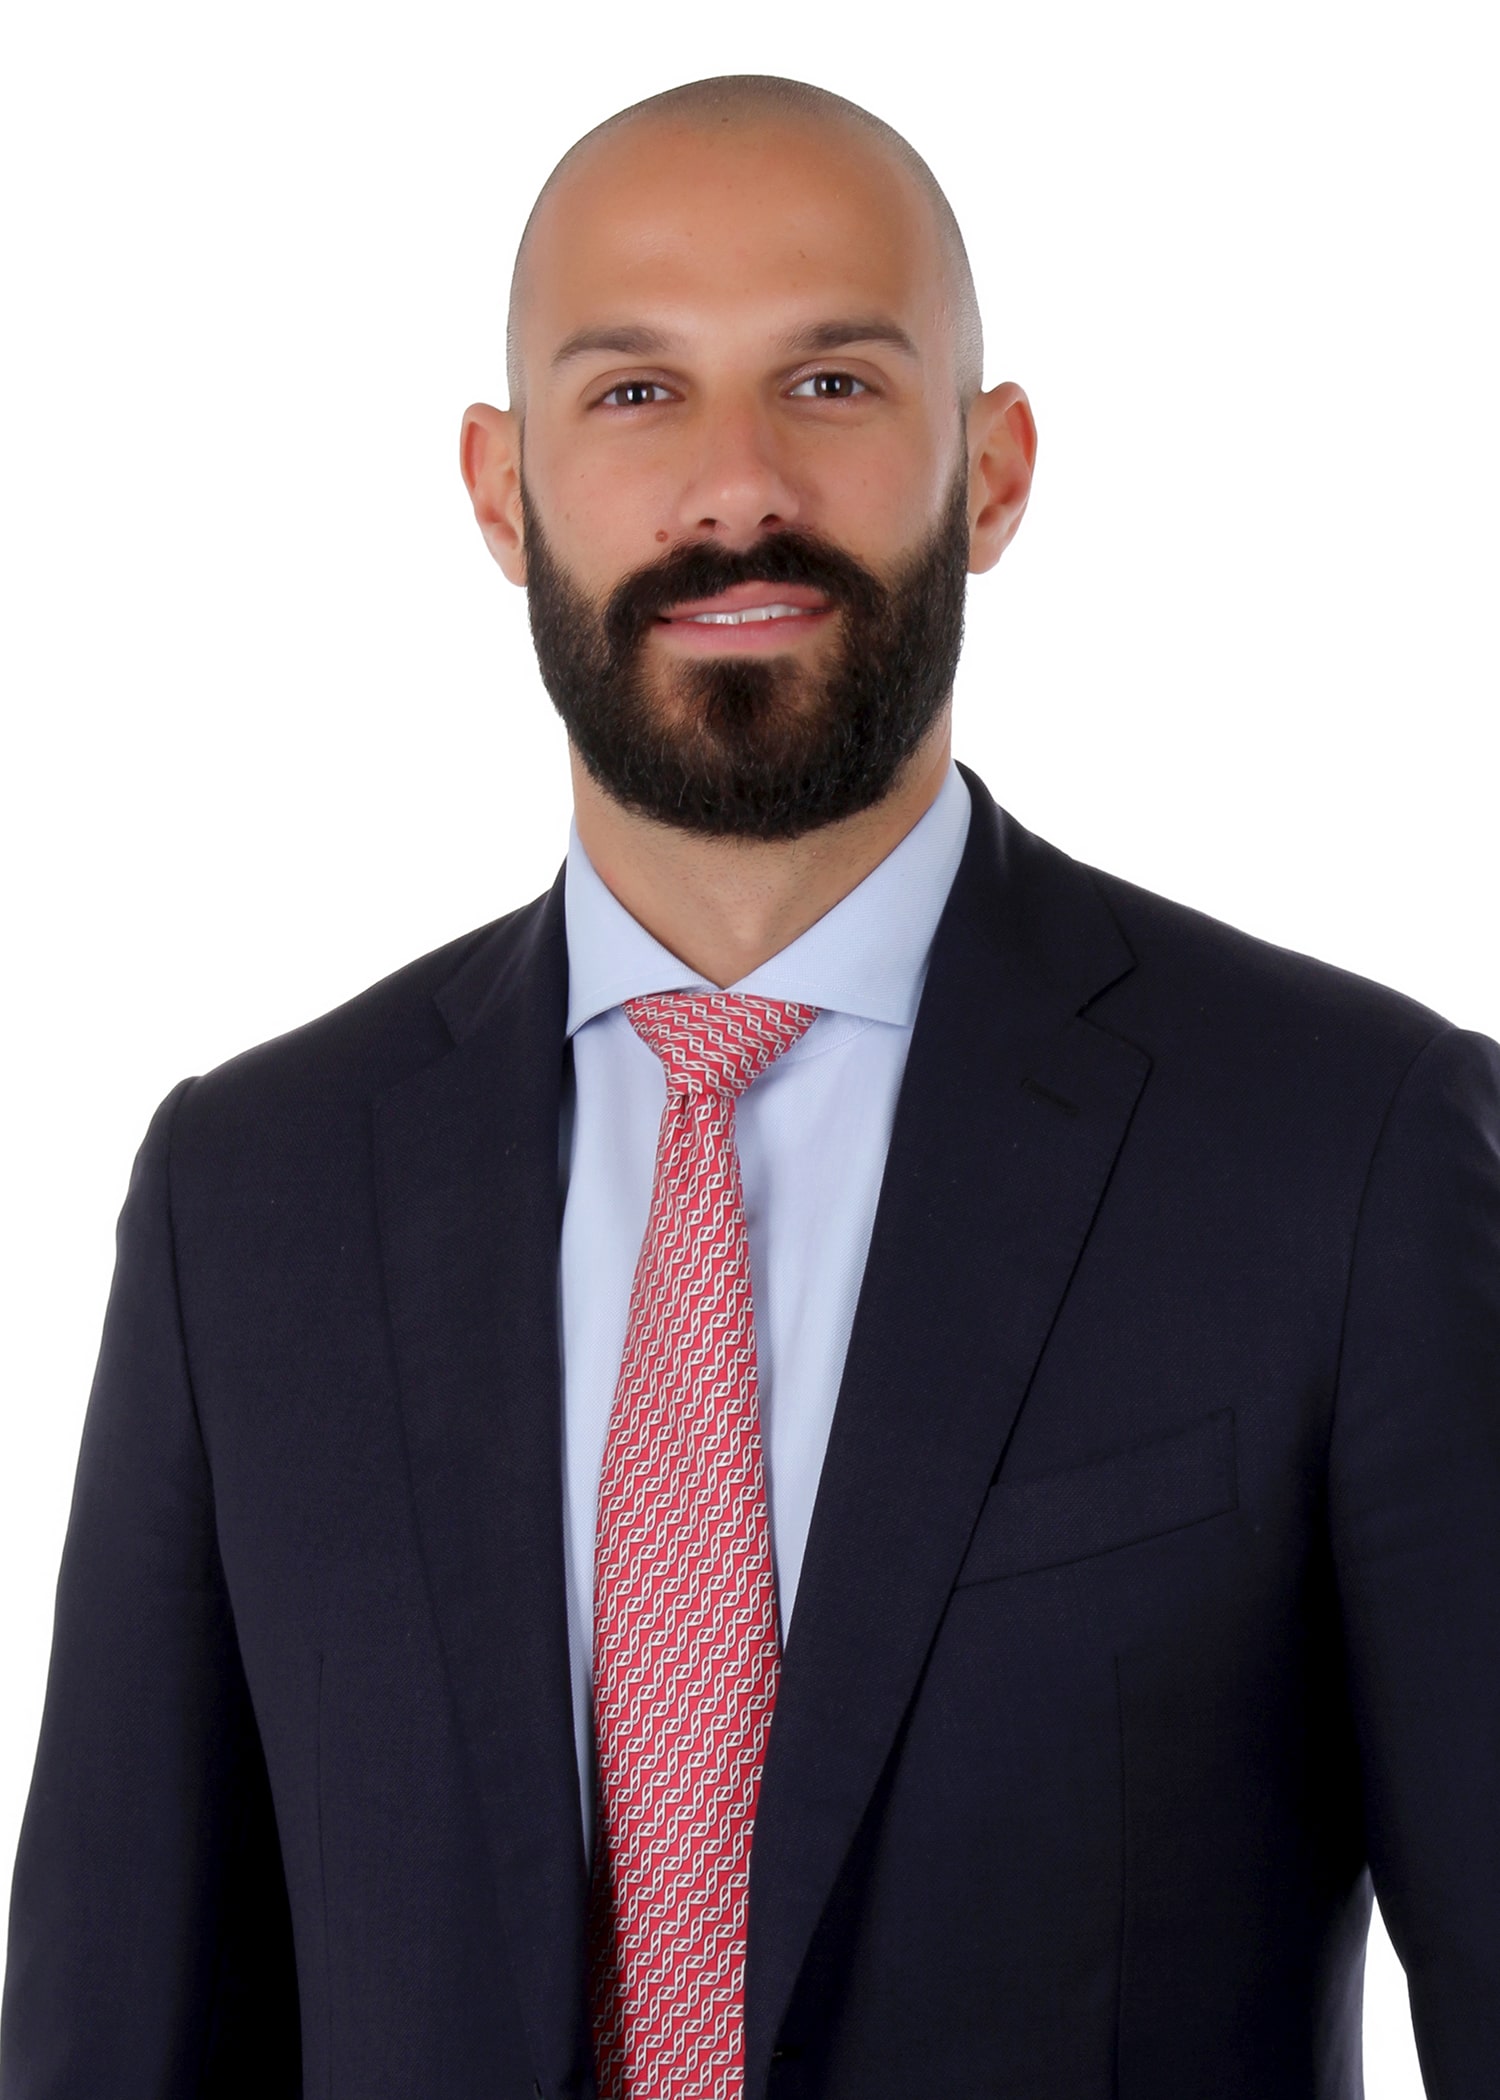 AxiCorp Secures Filippo De Rosa as its Head of Middle East ...